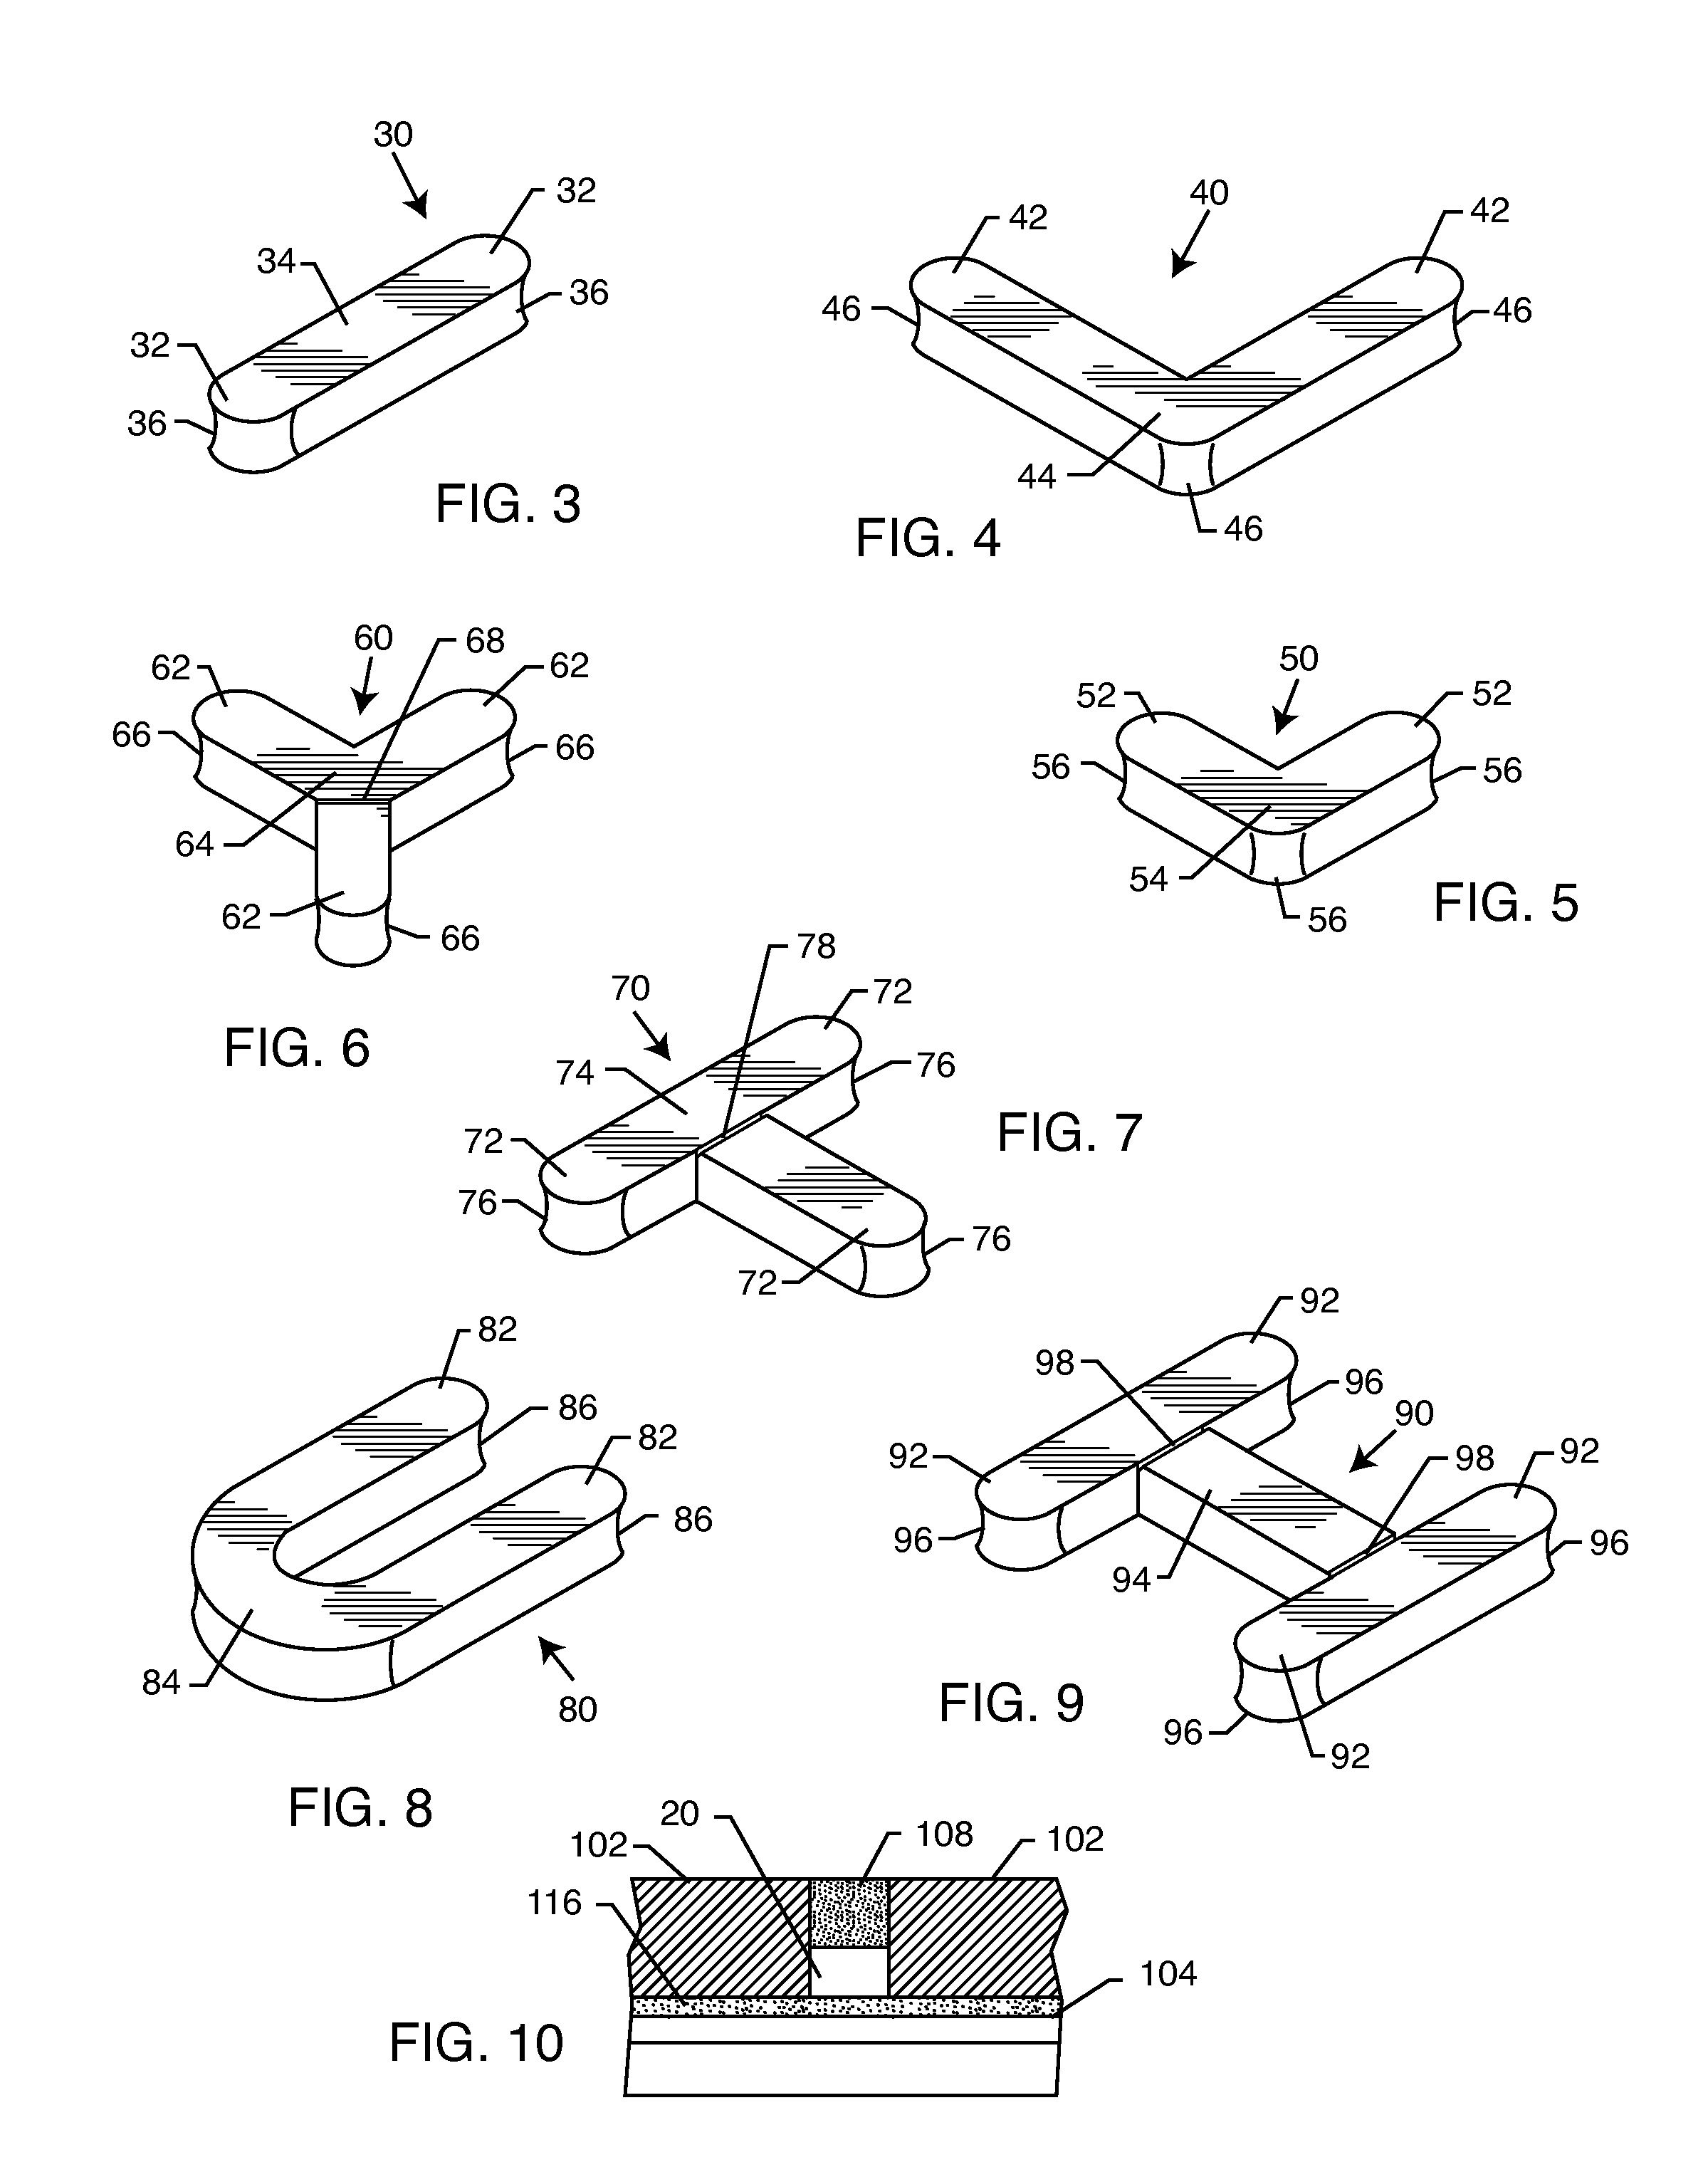 Cement-based tile-setting spacers and related process